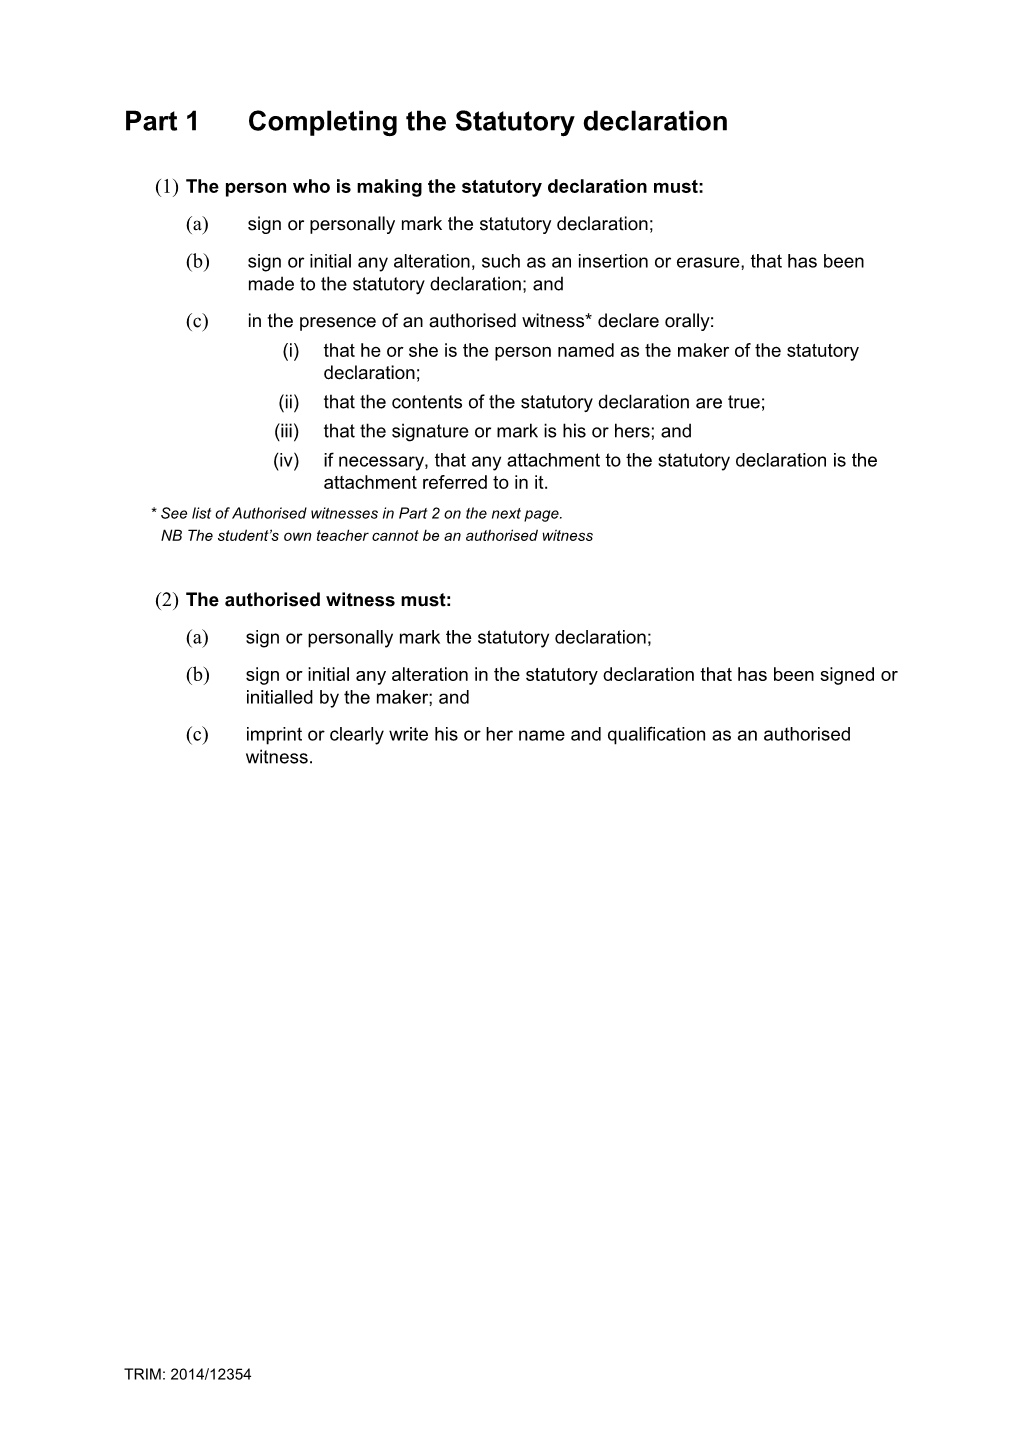 Part 1Completing the Statutory Declaration